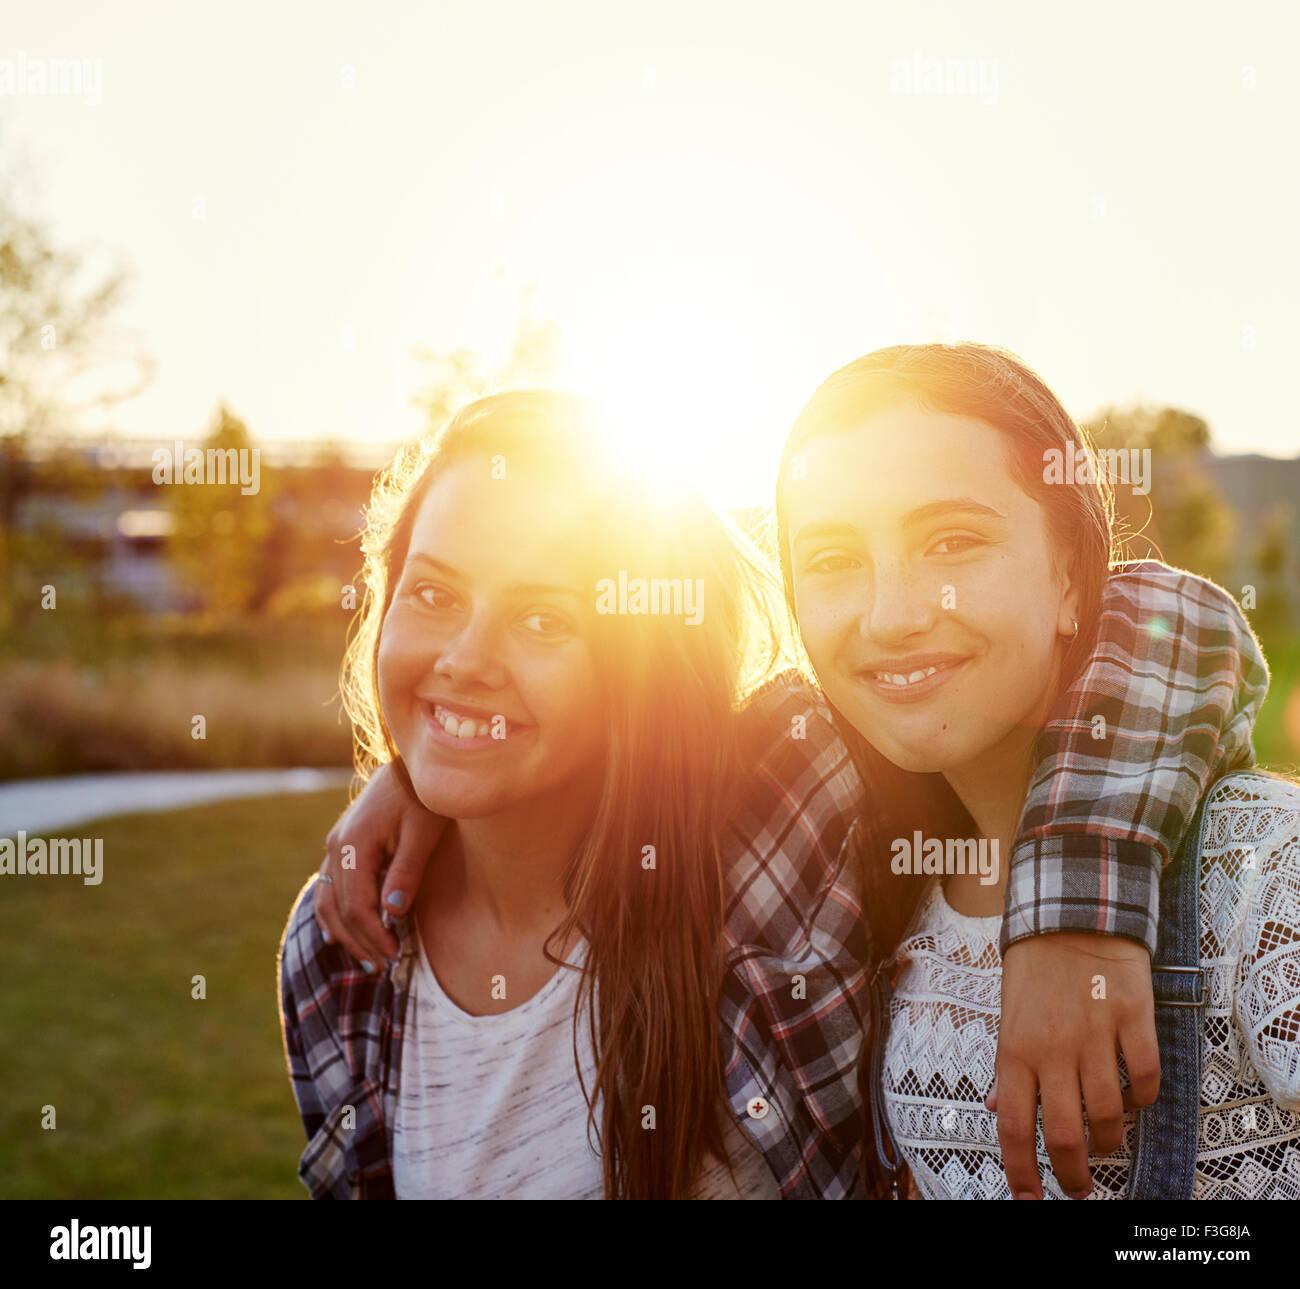 Two teenage girls outside on a summer evening in sun flare Stock Photo